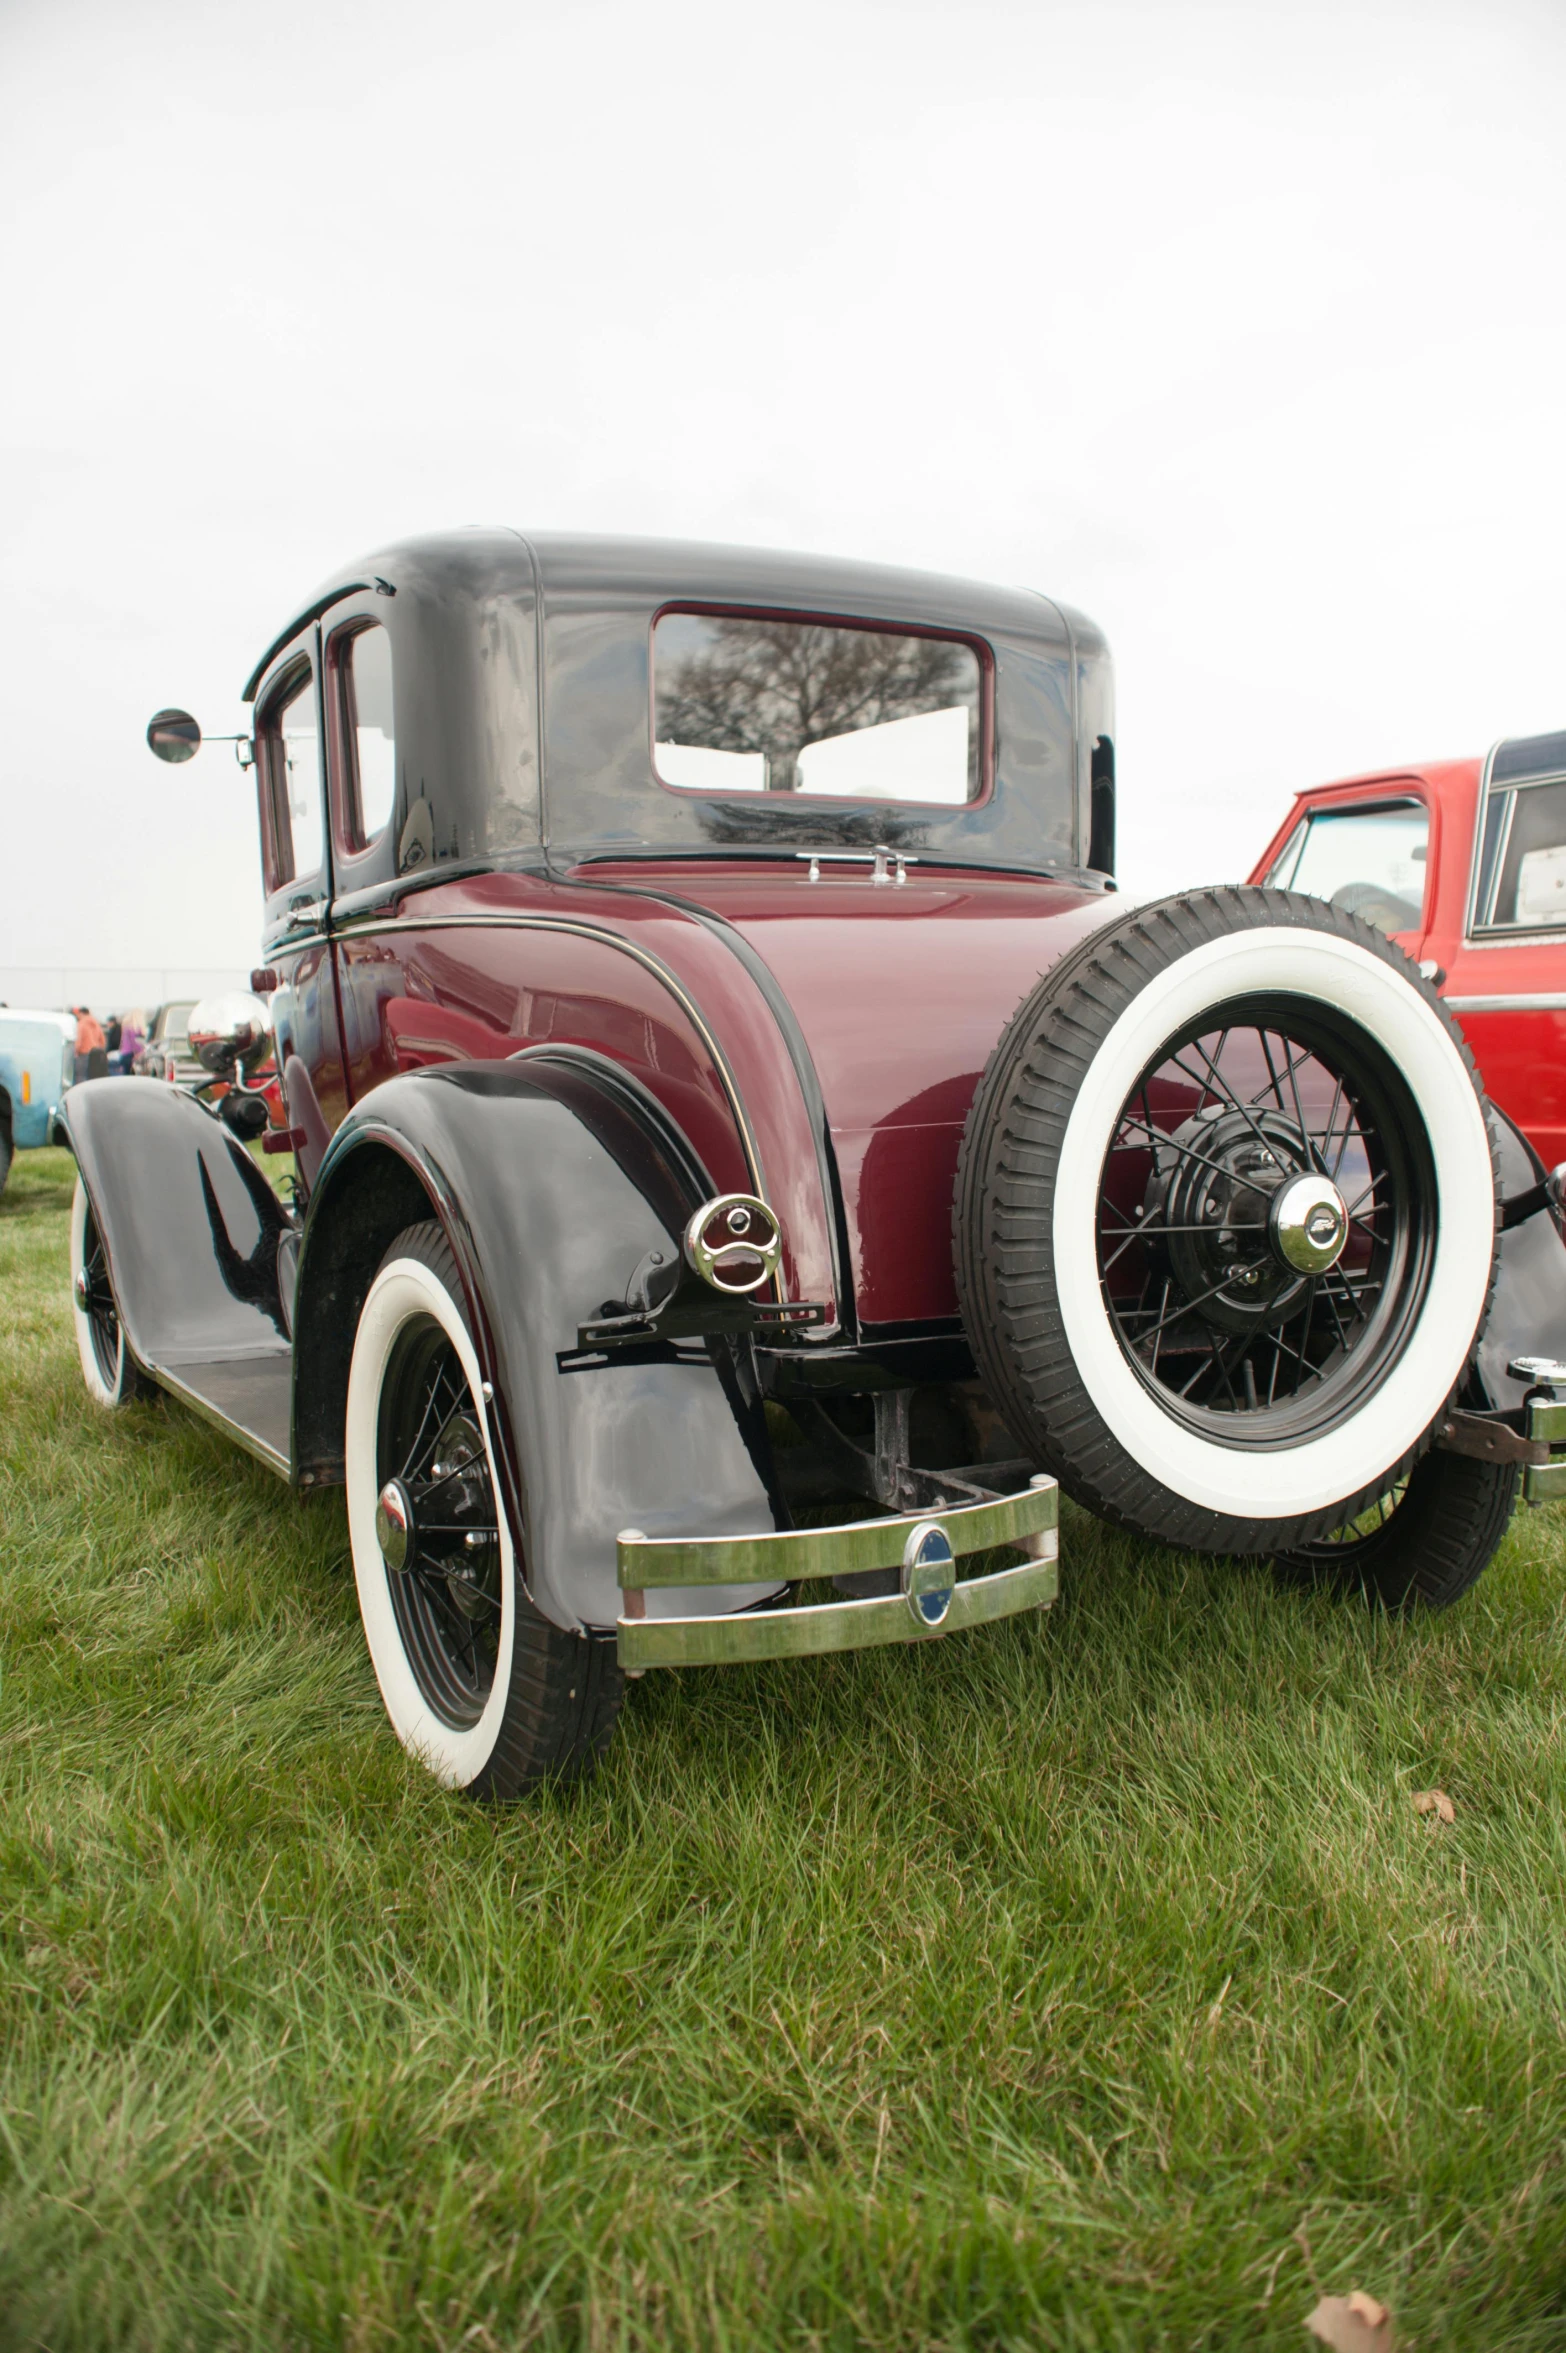 an old style  rod is parked in the grass